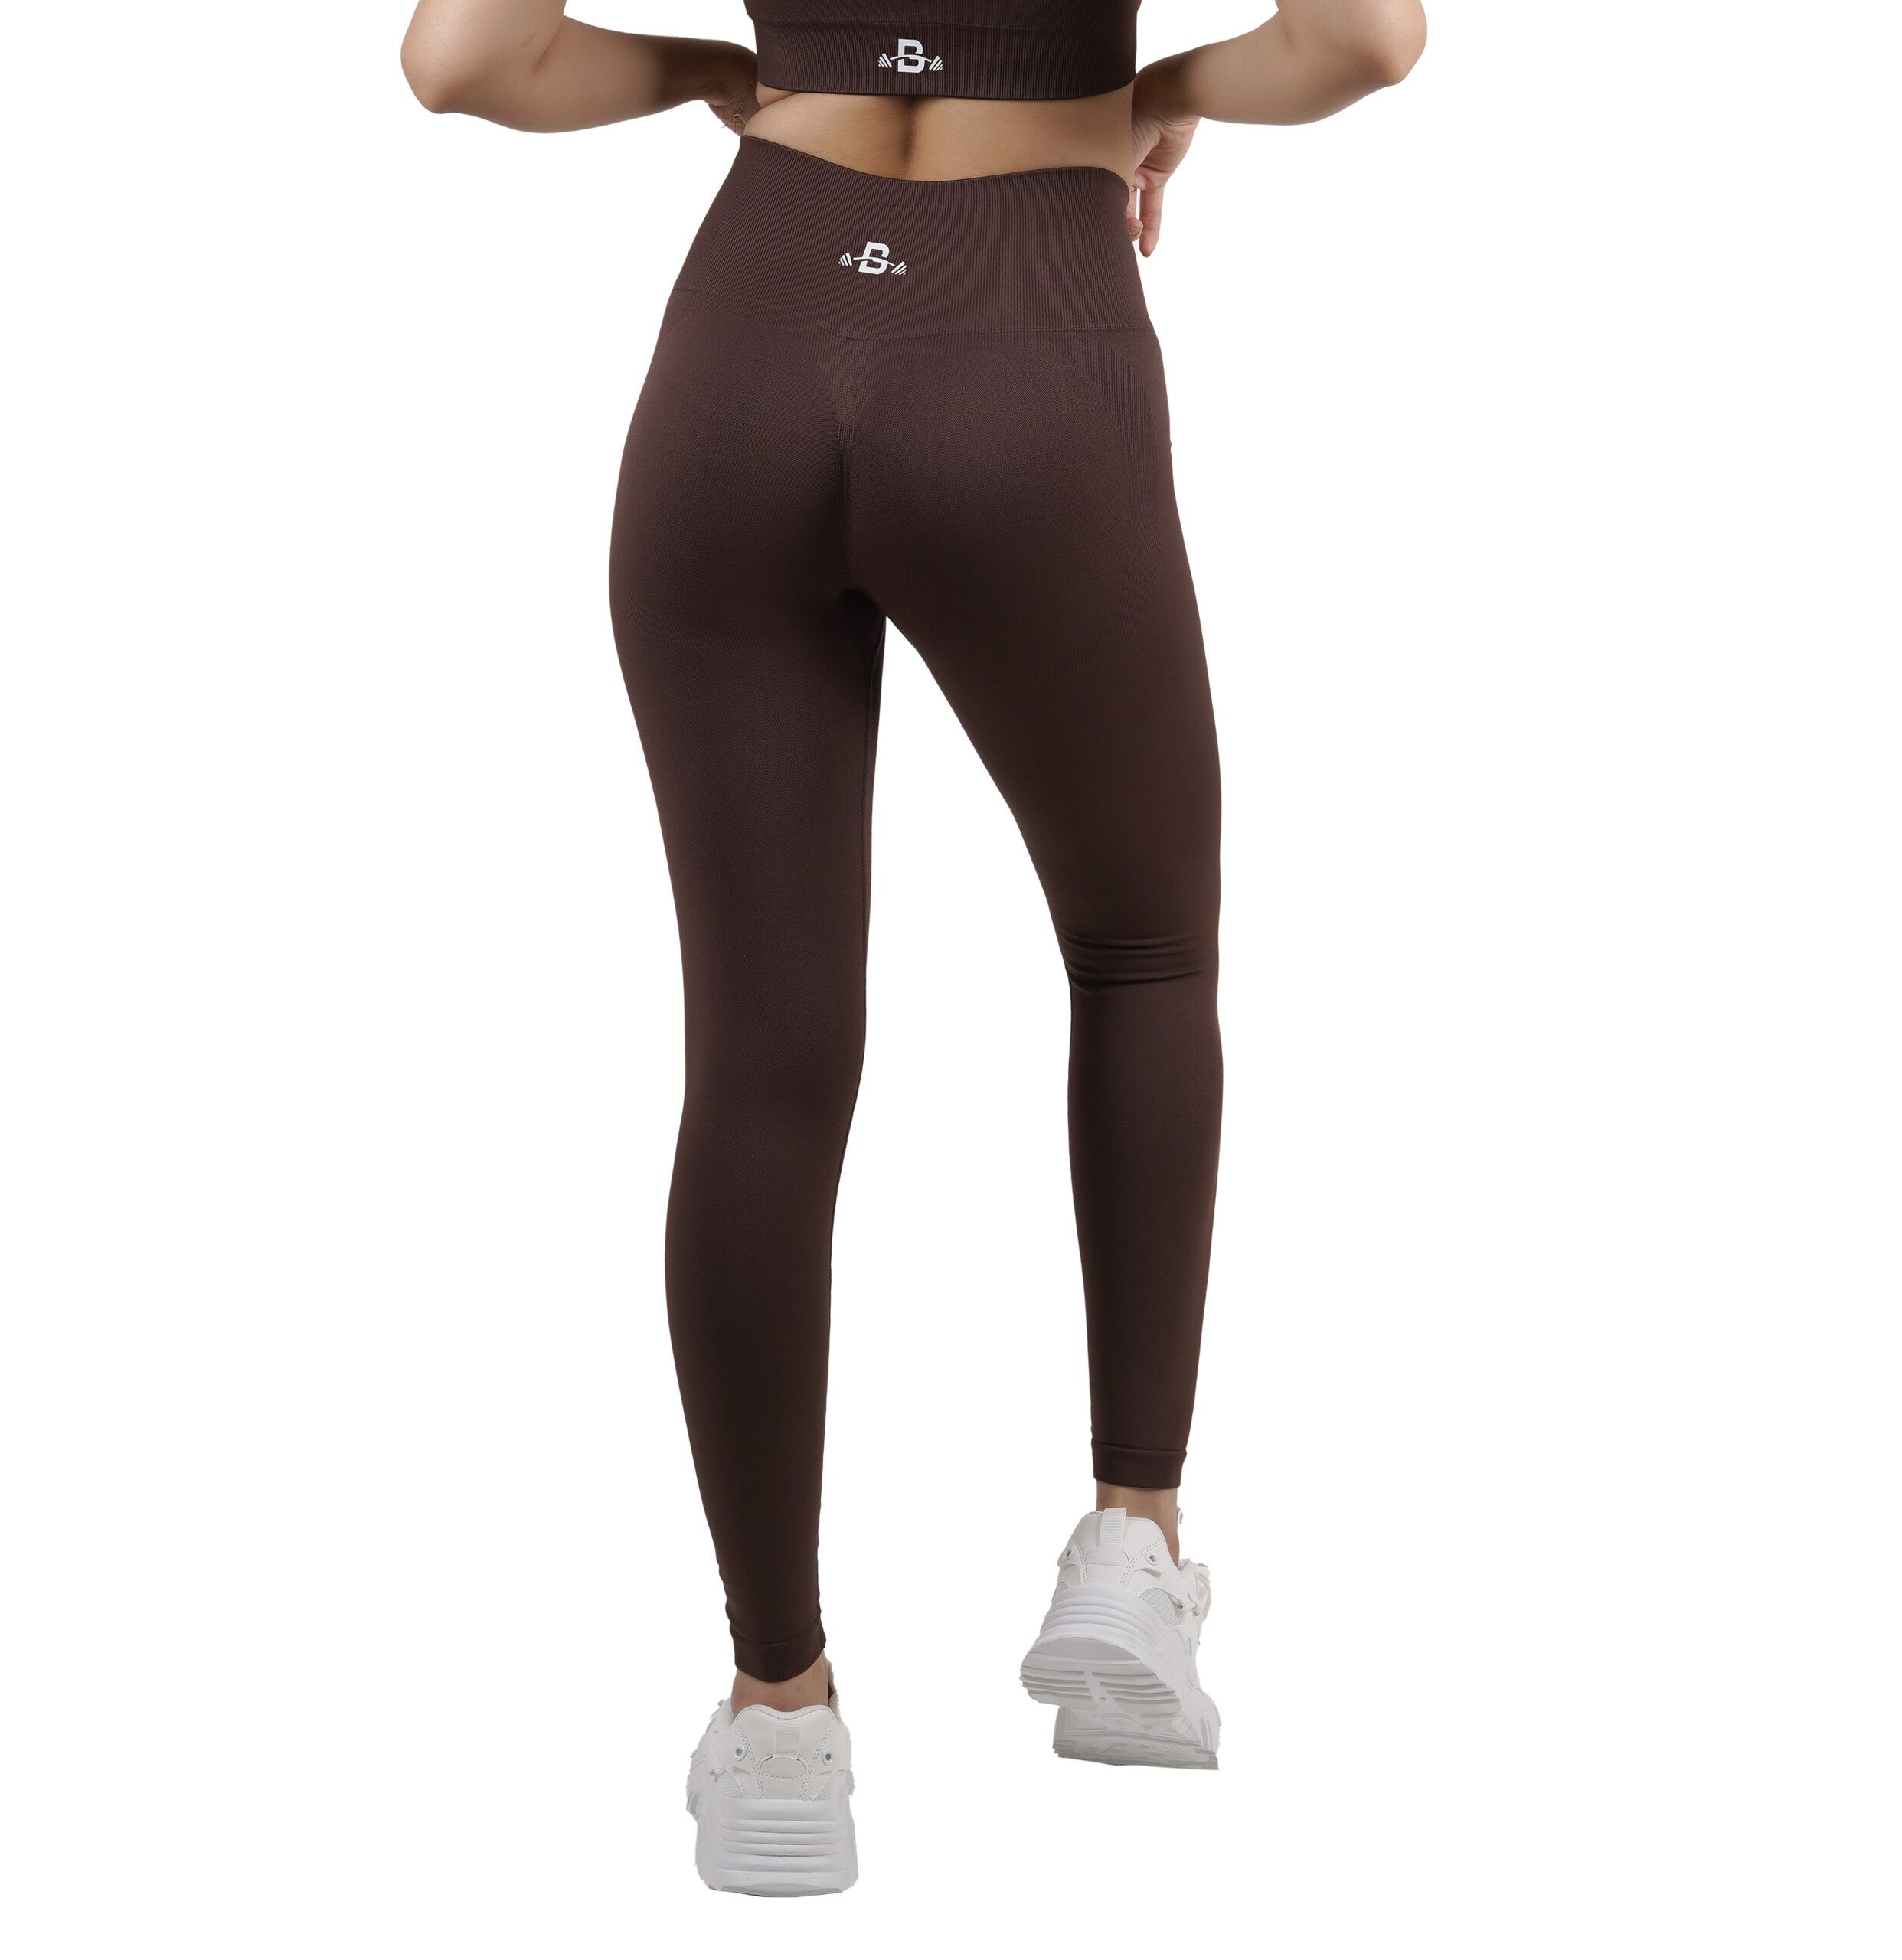 Cocoa Brown High Waist Ruched Leggings